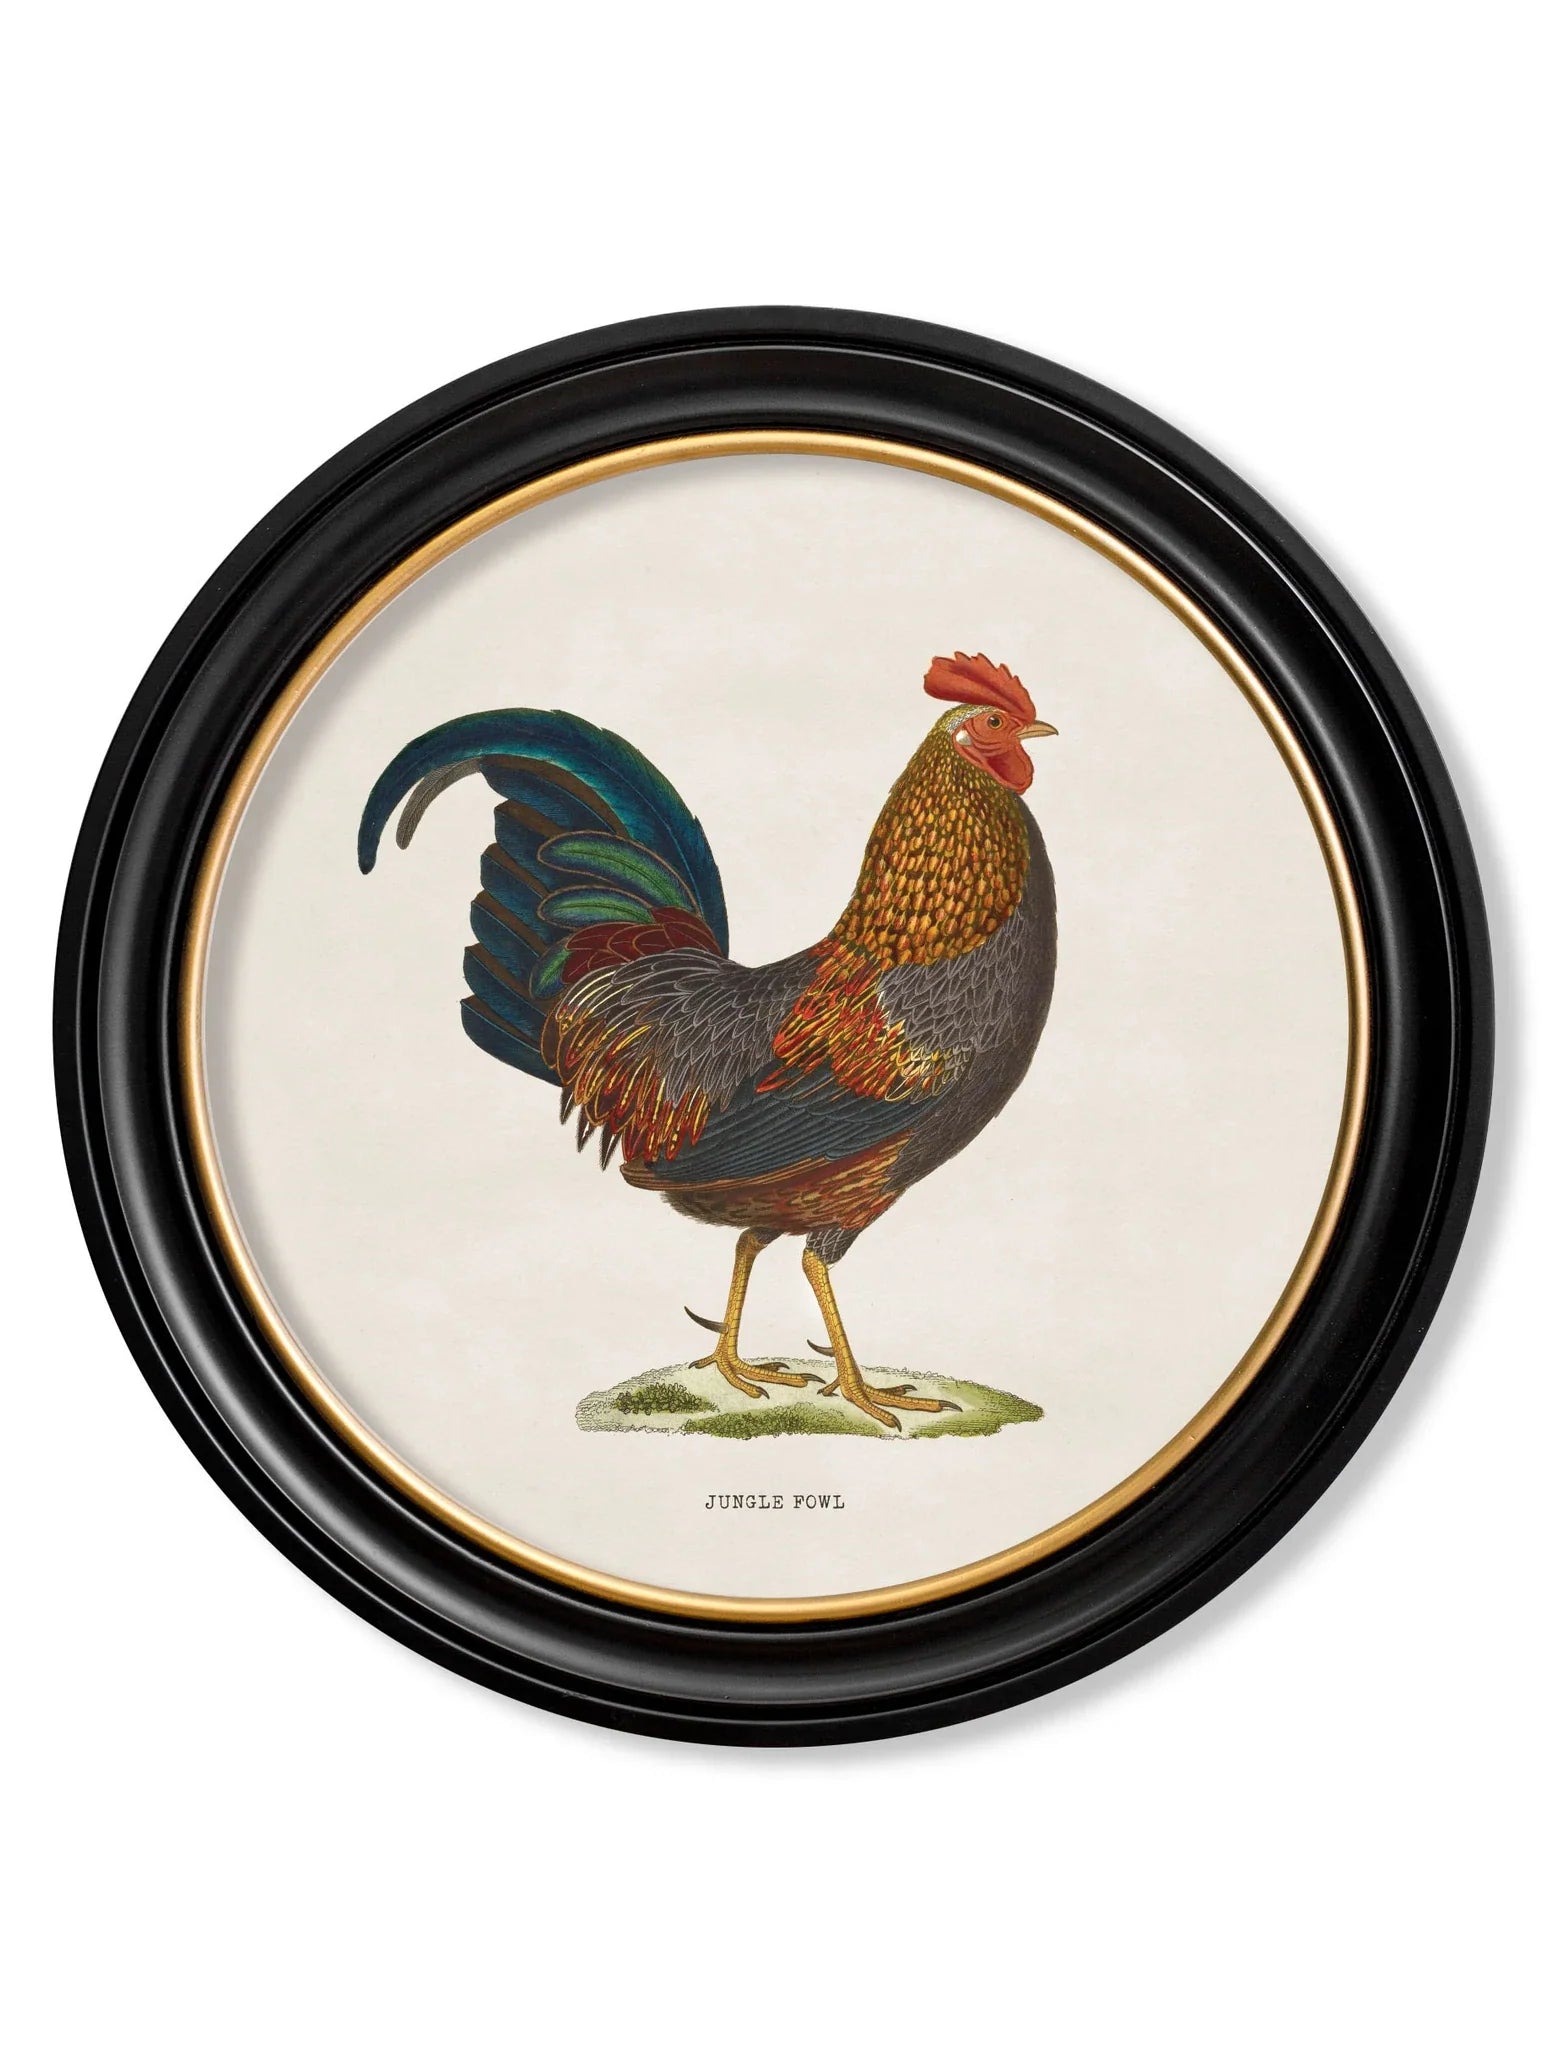 C.1838 Junglefowl in Round Frames for sale - Woodcock and Cavendish